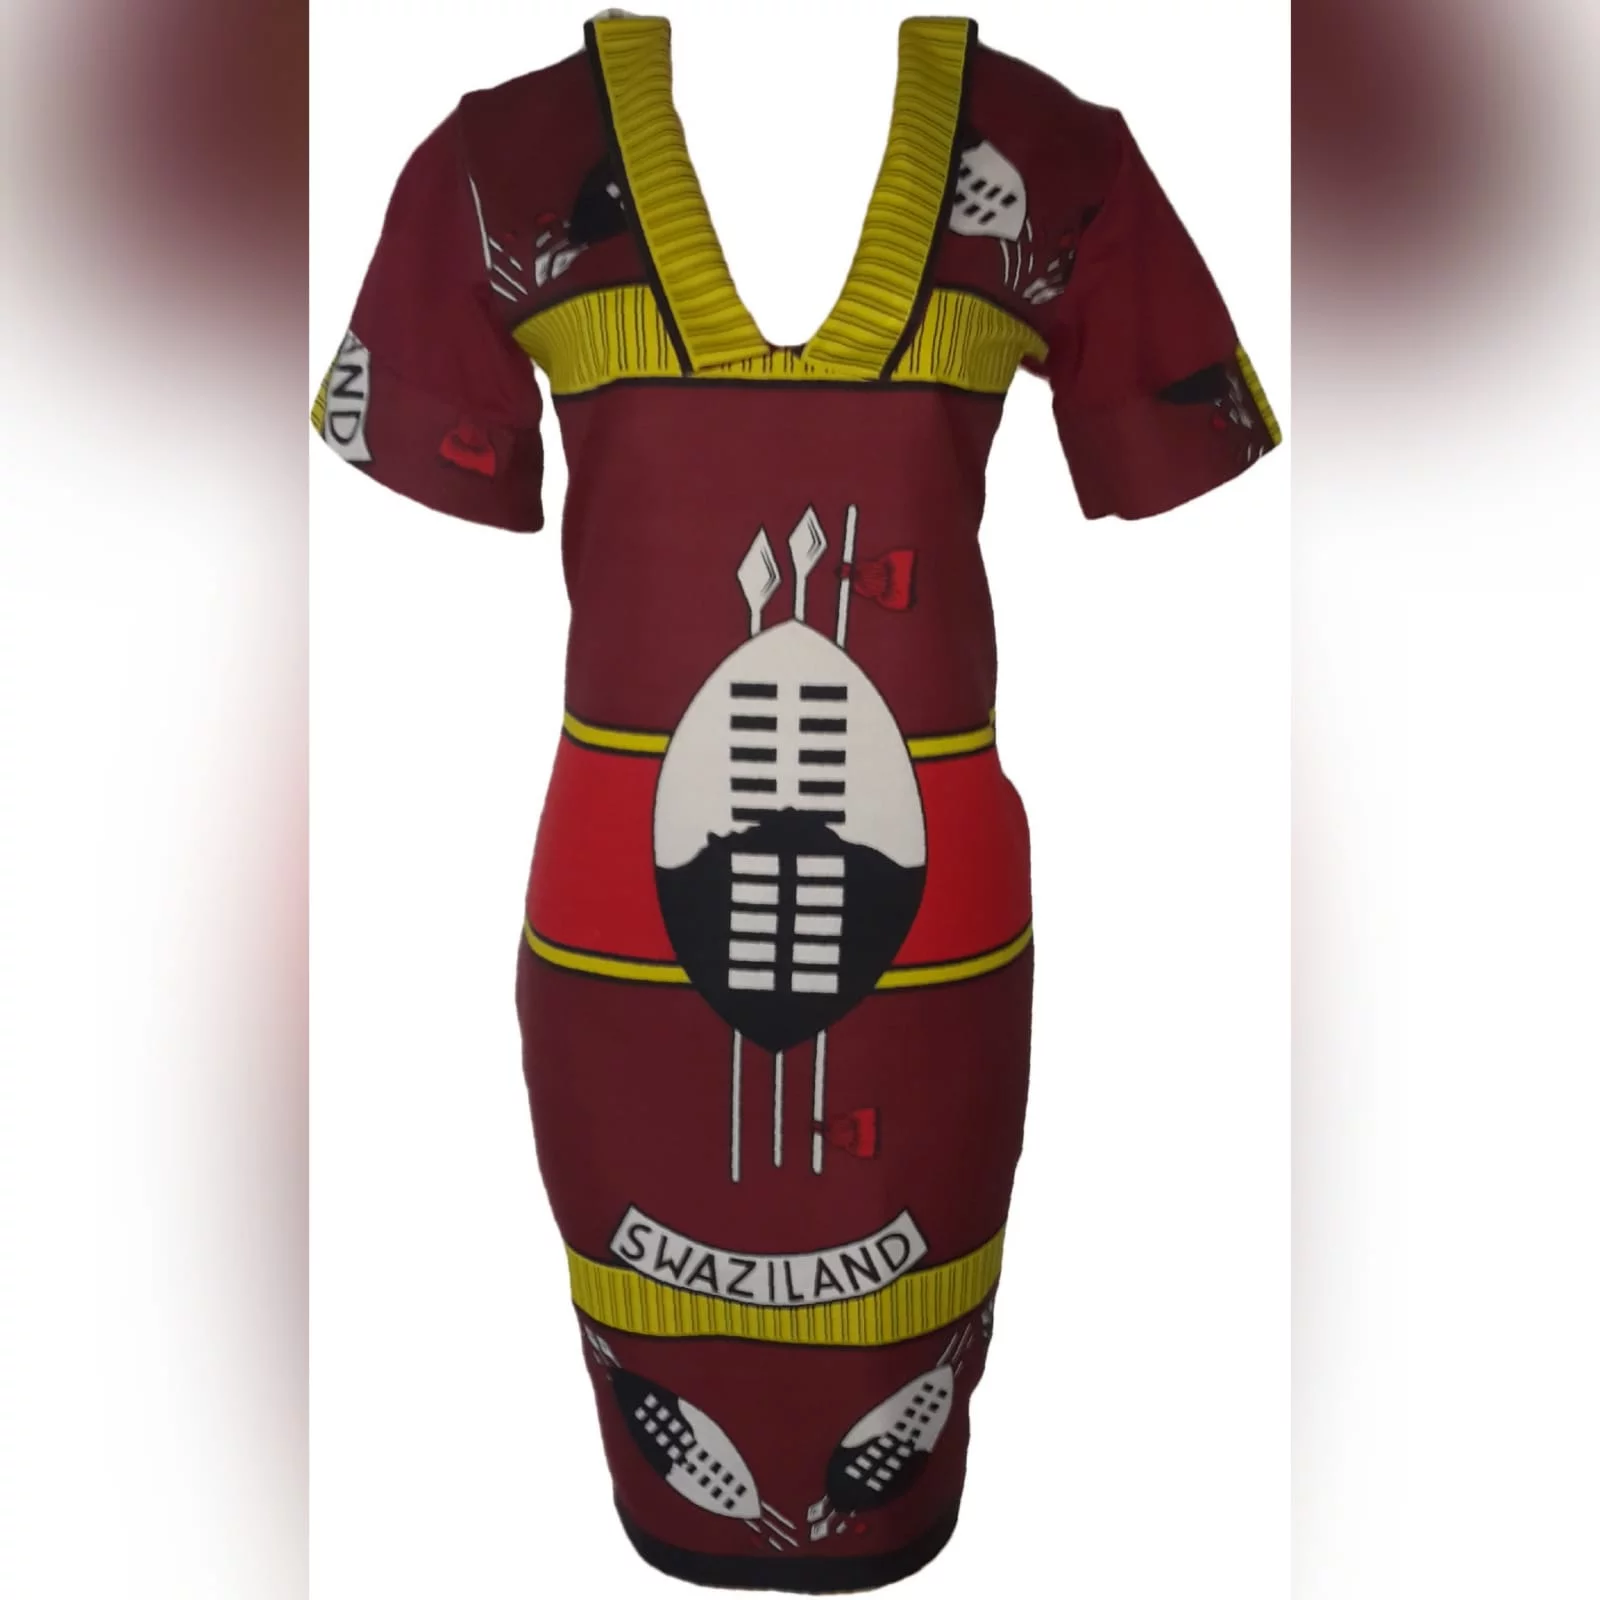 Traditional swati dress with matching swati doek 5 traditional swati dress with a v neckline, finished with a collar design that can be worn in 3 different ways. With a matching swati doek.